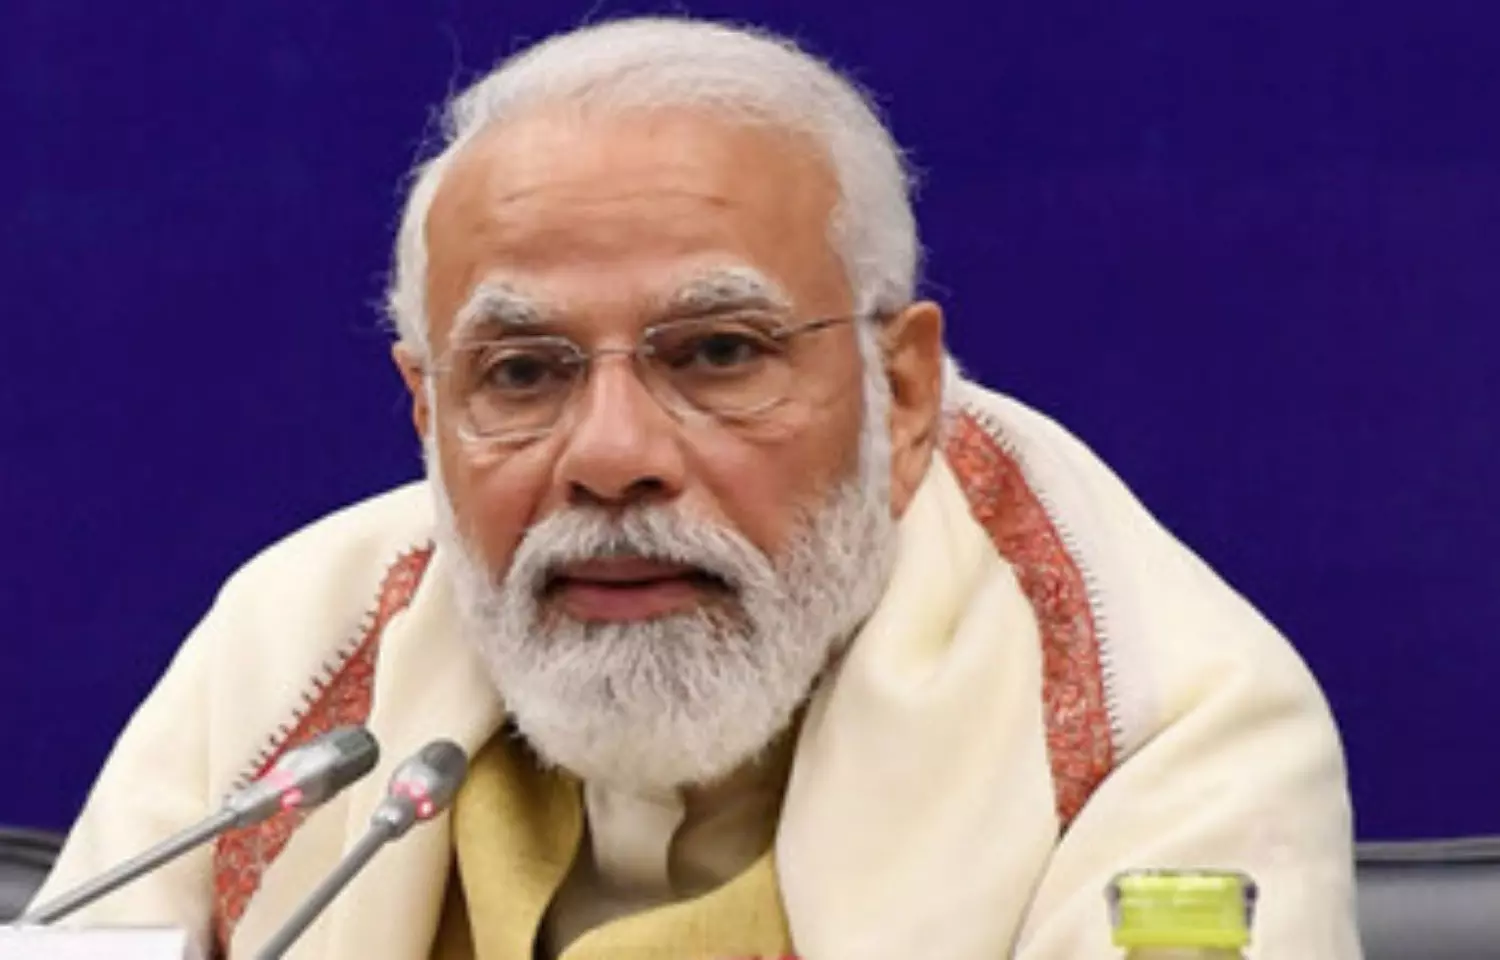 Fight against Pandemic is not over: PM Modi calls for effective contact tracing, boosting health infra amid Omicron scare